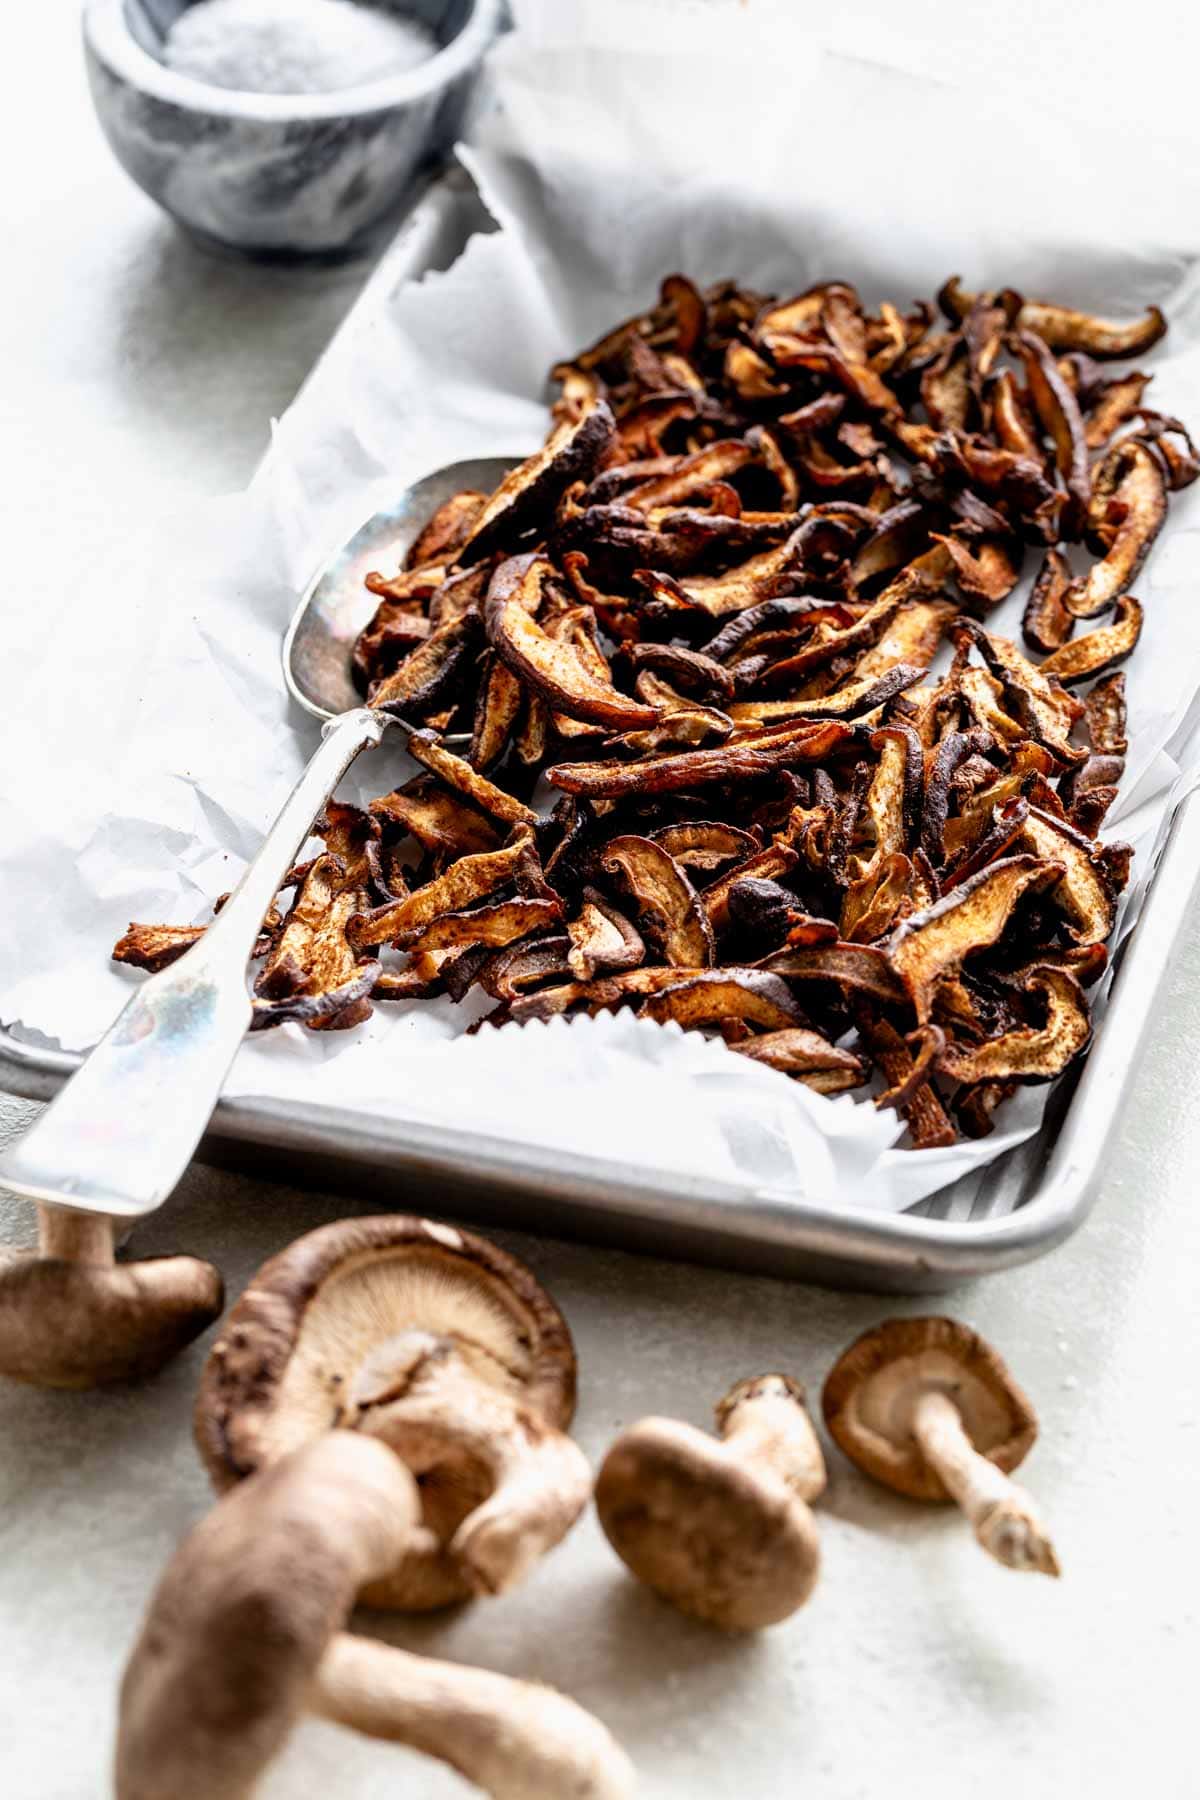 Shiitake mushroom bacon on baking parchment on a tray with a spoon on the tray, on a table. Raw shiitake mushrooms are next to the tray at the bottom of the picture.